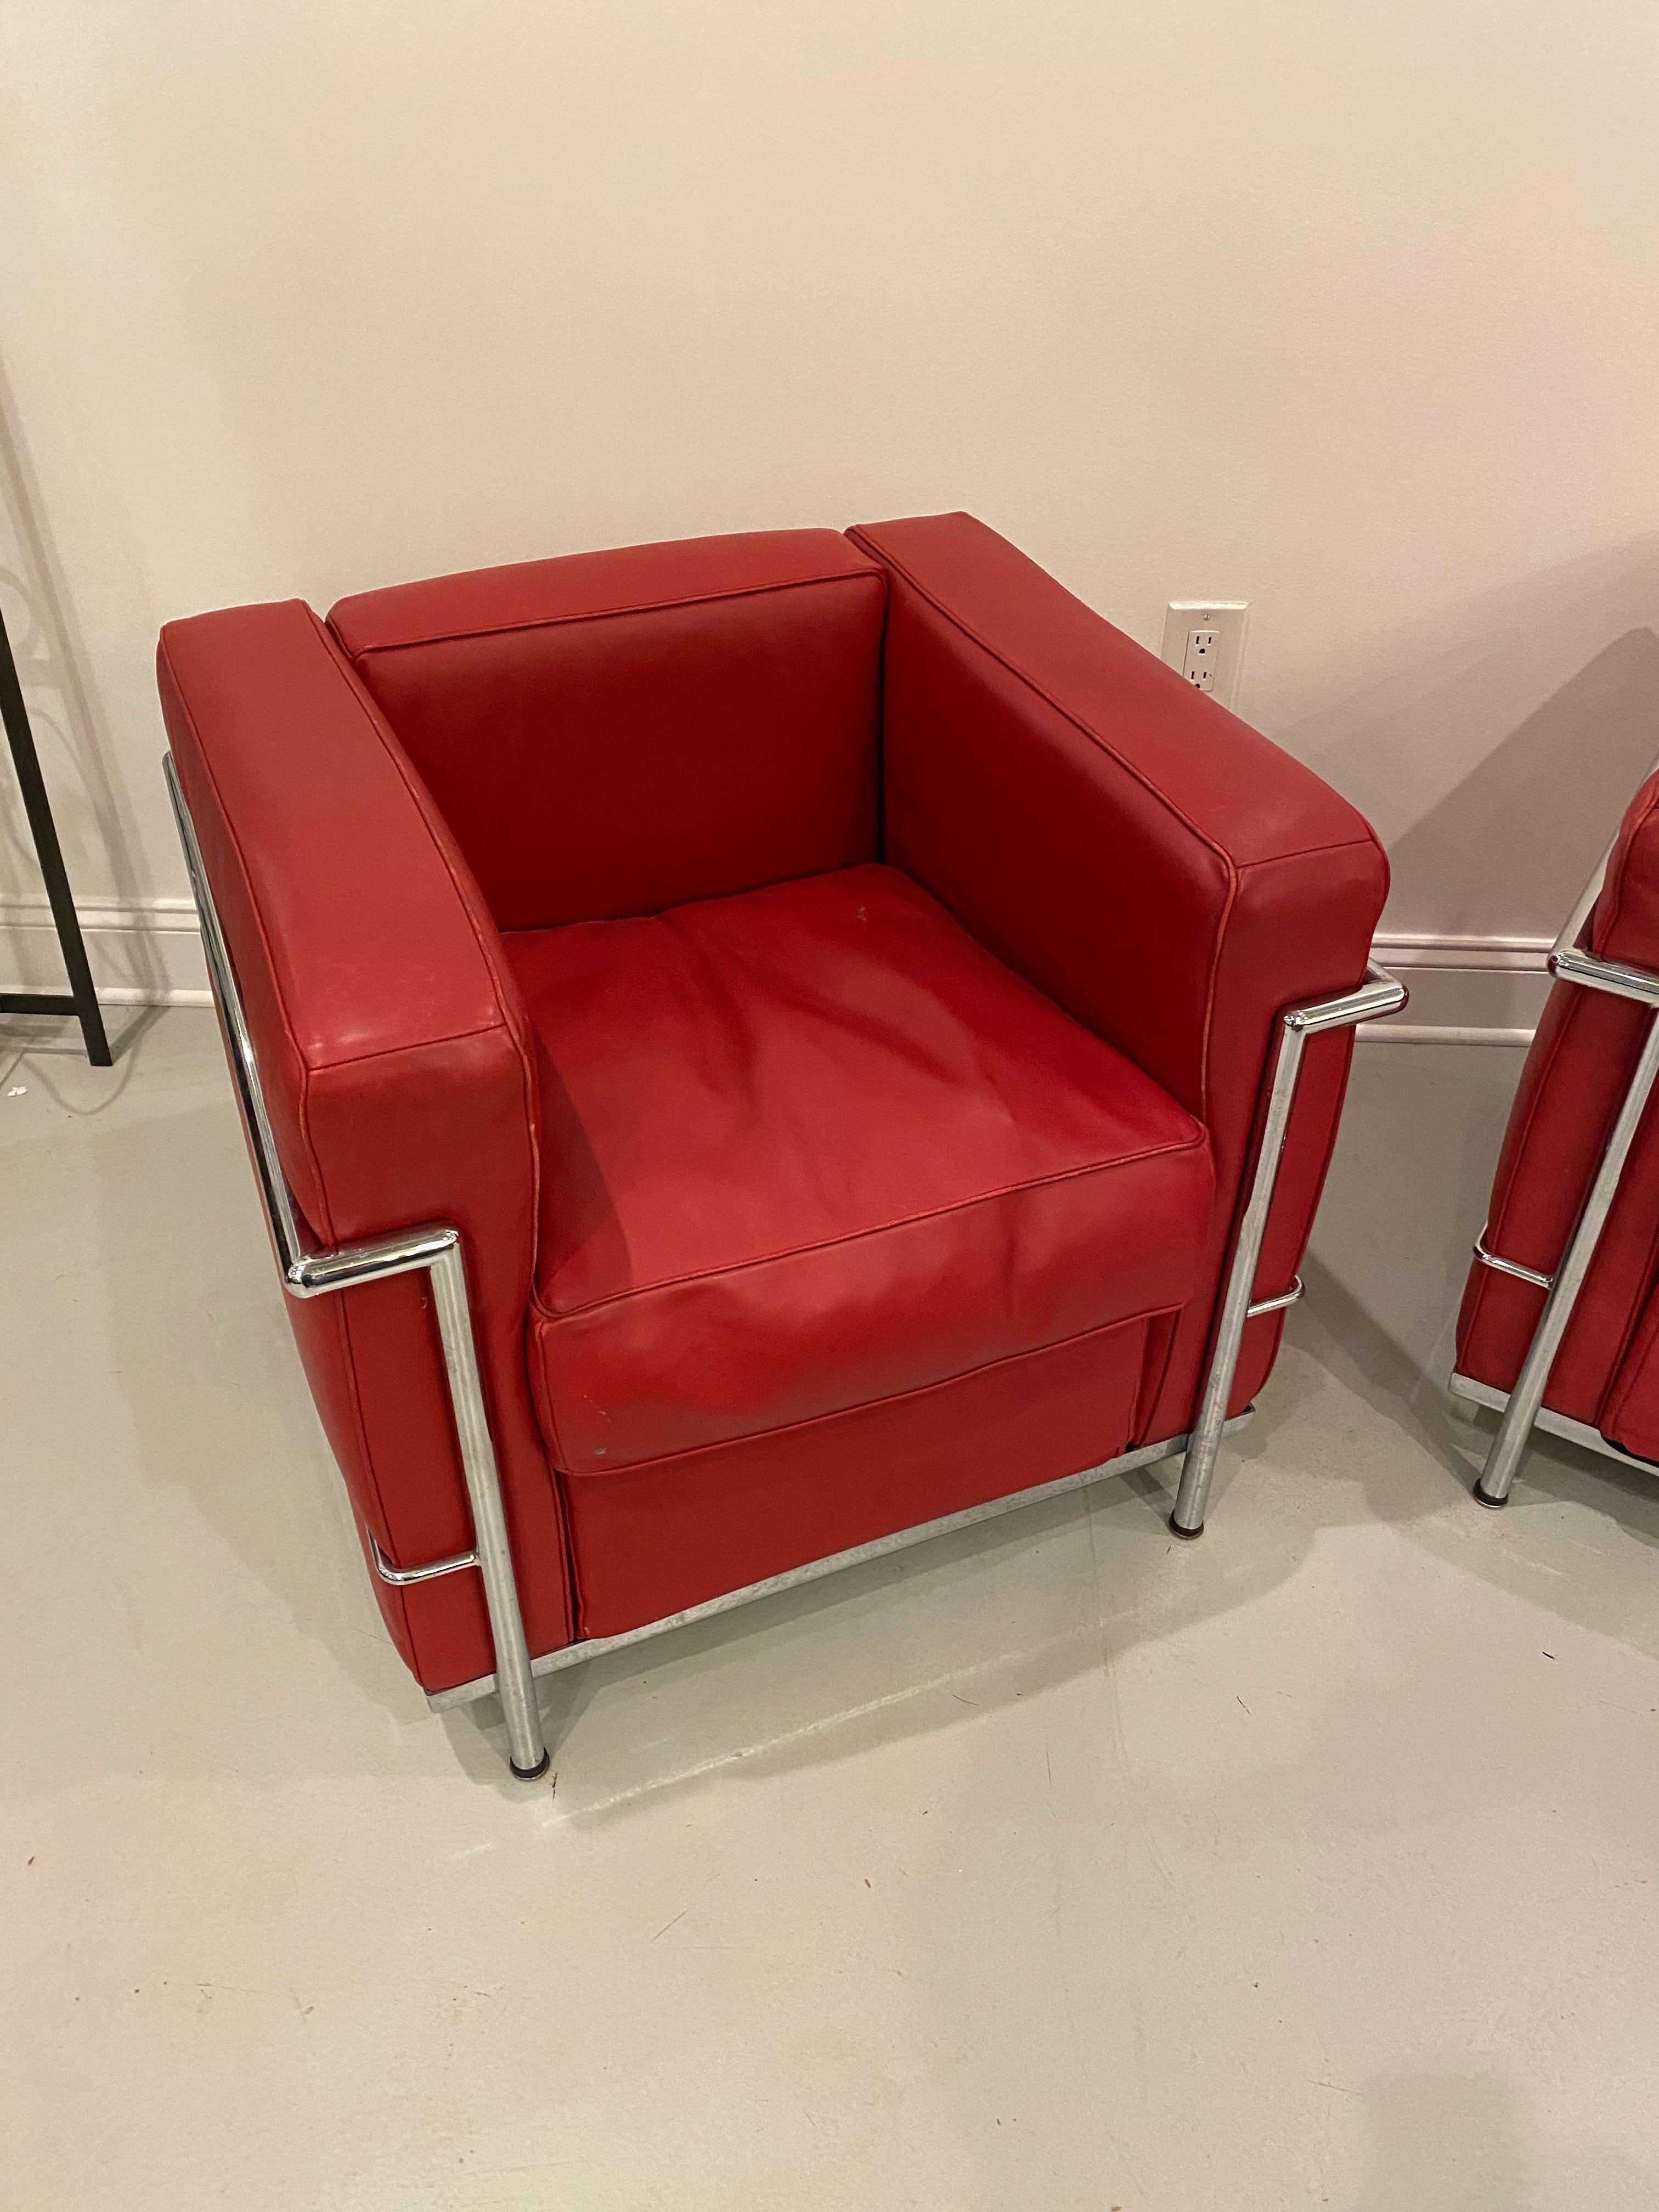 Beautiful and stylish chrome and red leather club chairs in the style of Le Corbusier.